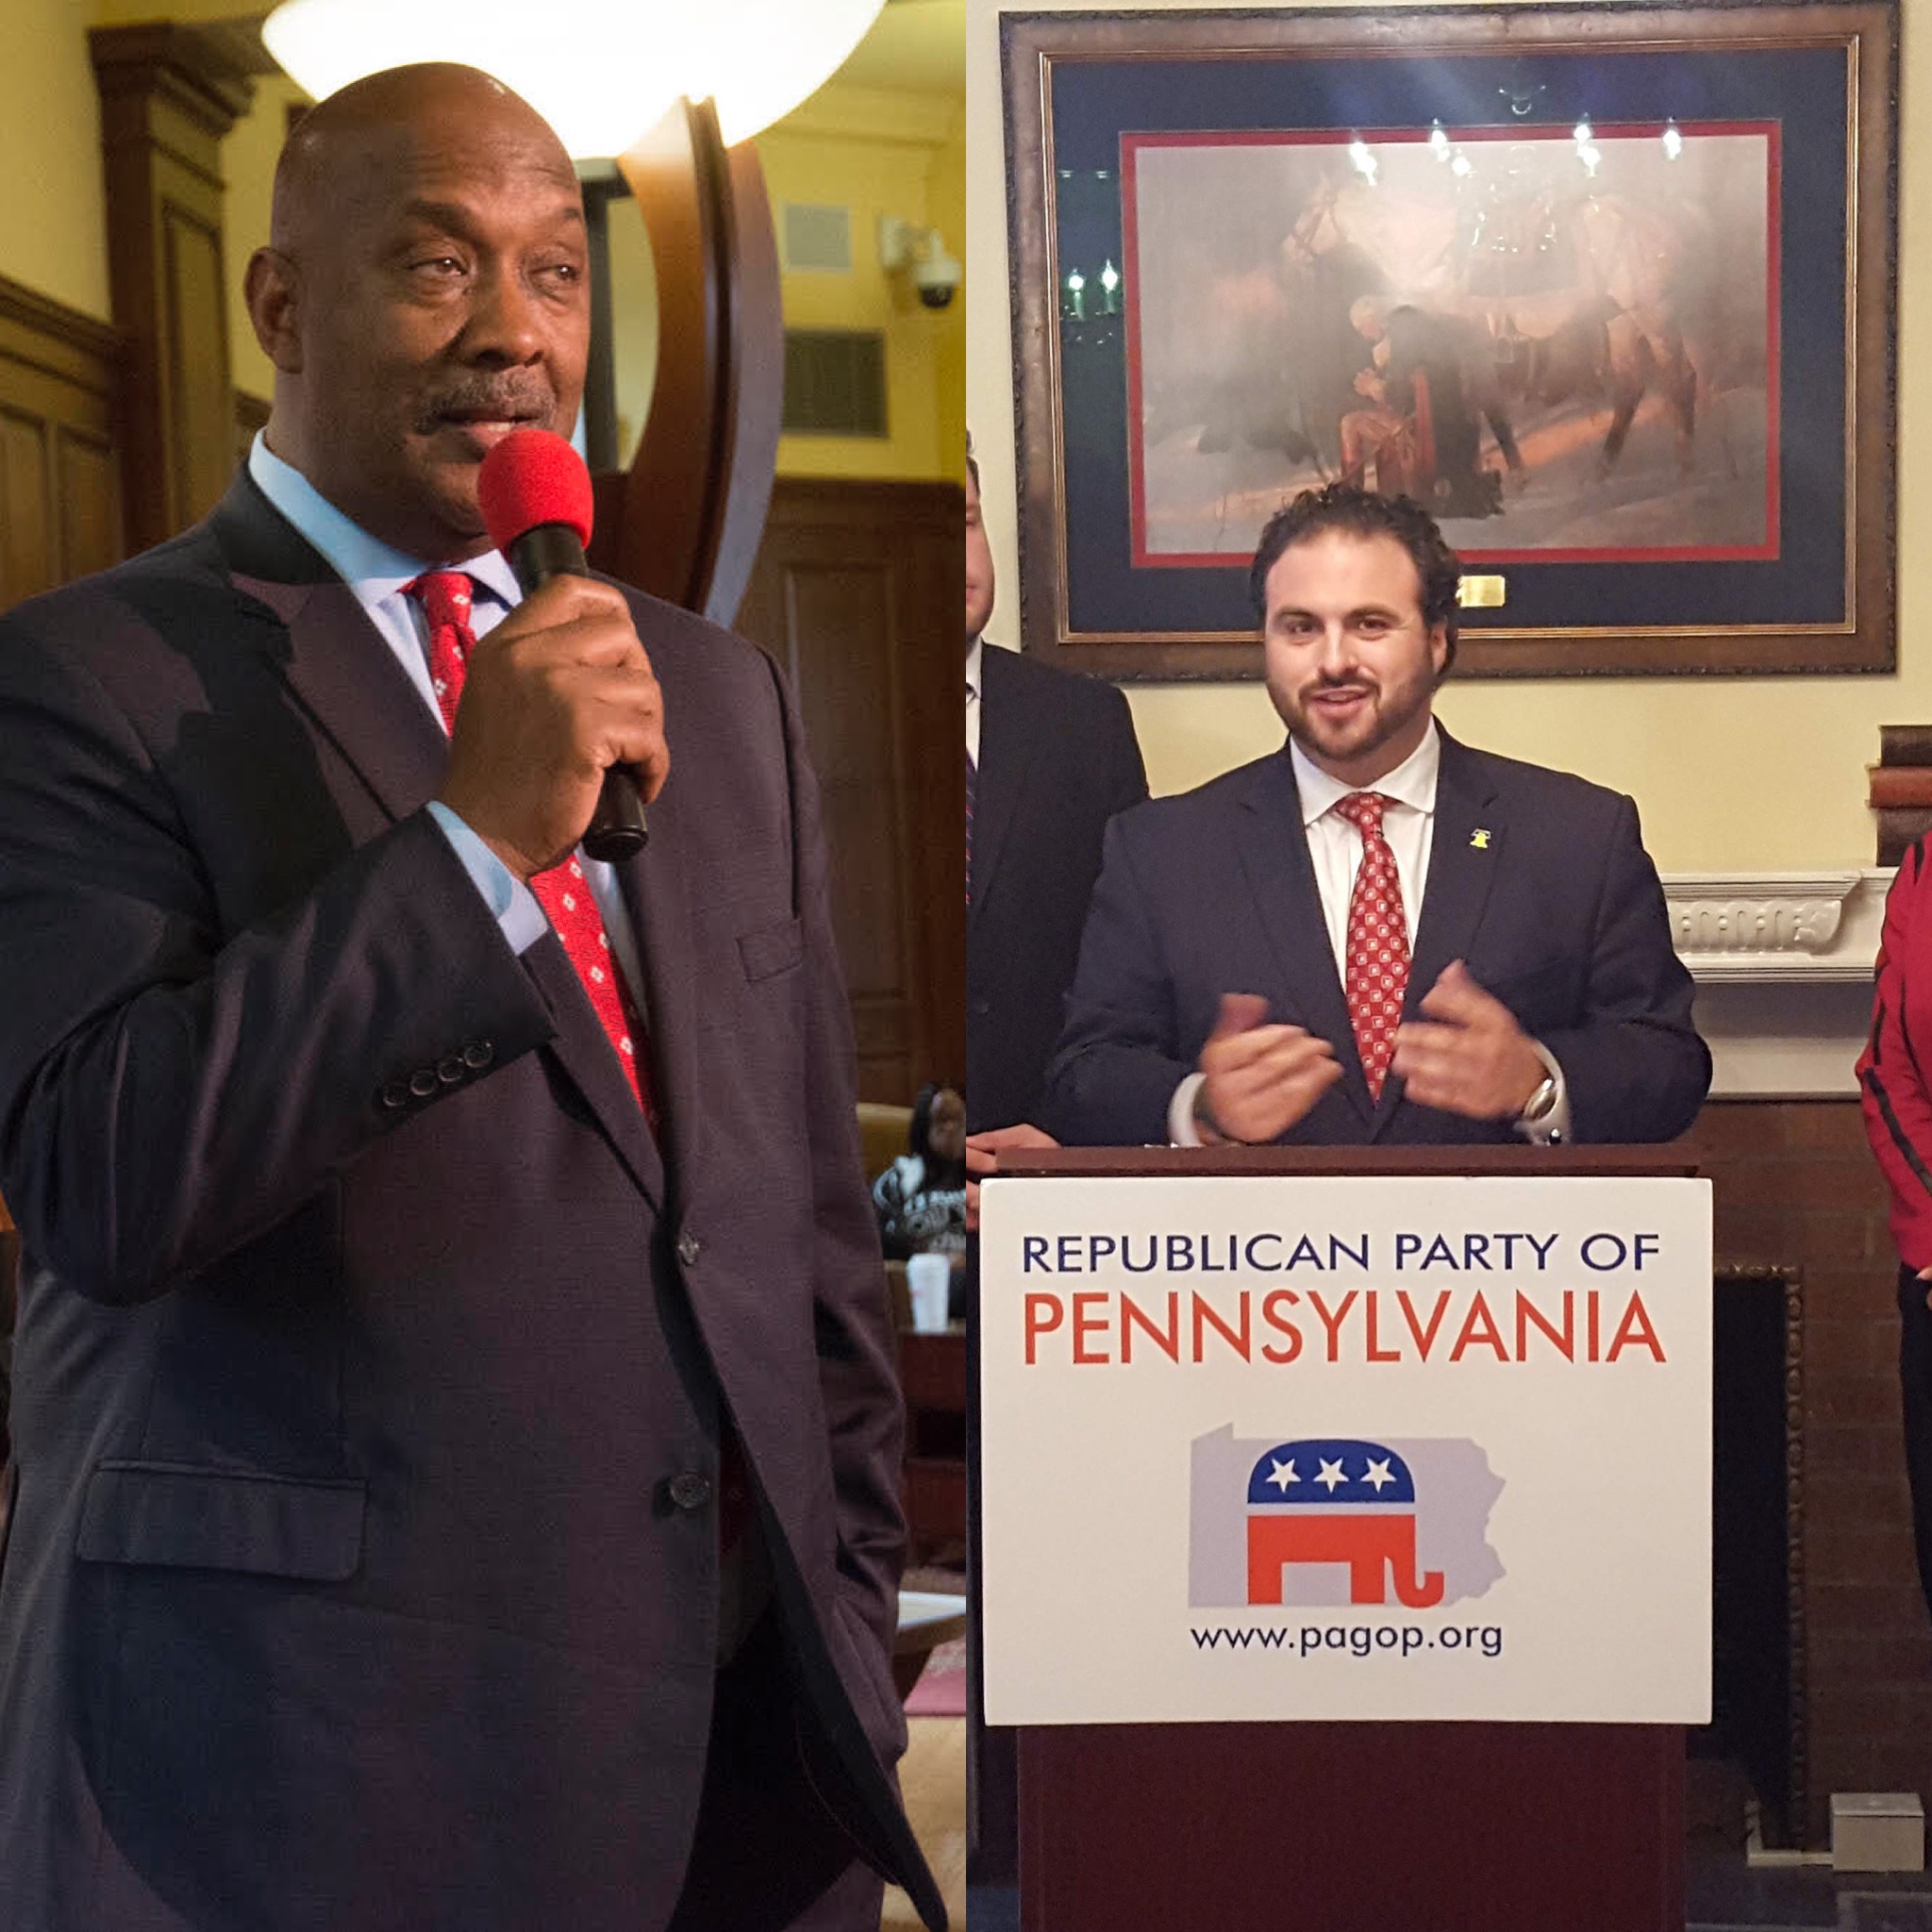 Democratic candidate Dwight Evans (left) and Republican candidate Bryan Leib (right). Photos: Linda Johnson / Chestnut Hill College (left) and Bryan Leib Campaign (right)